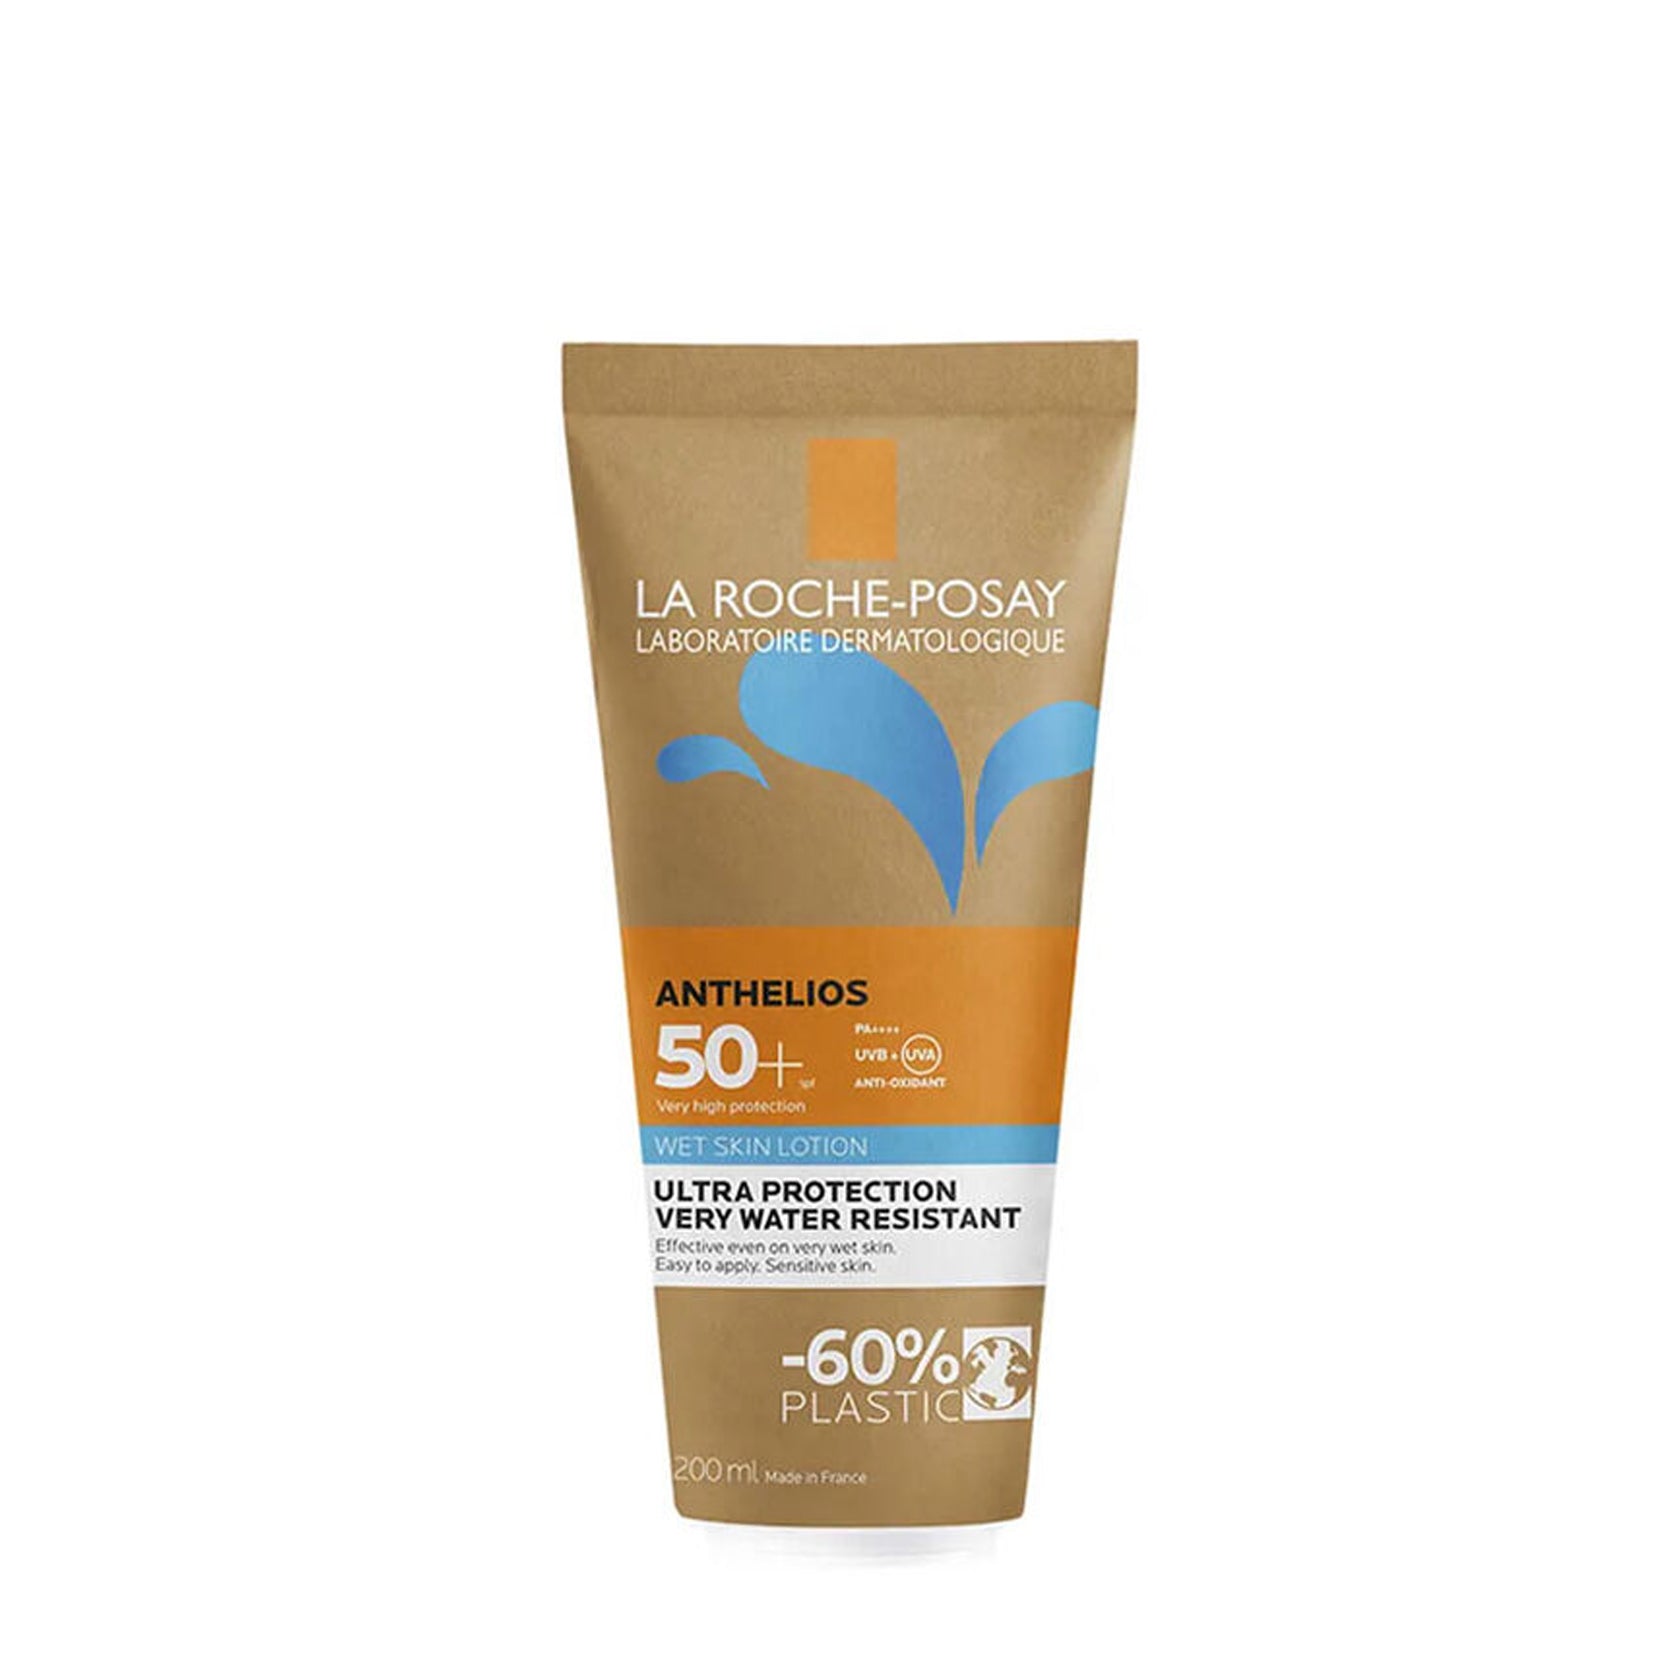 La Roche-Posay Anthelios Very Water Resistant SPF50+ 200ml